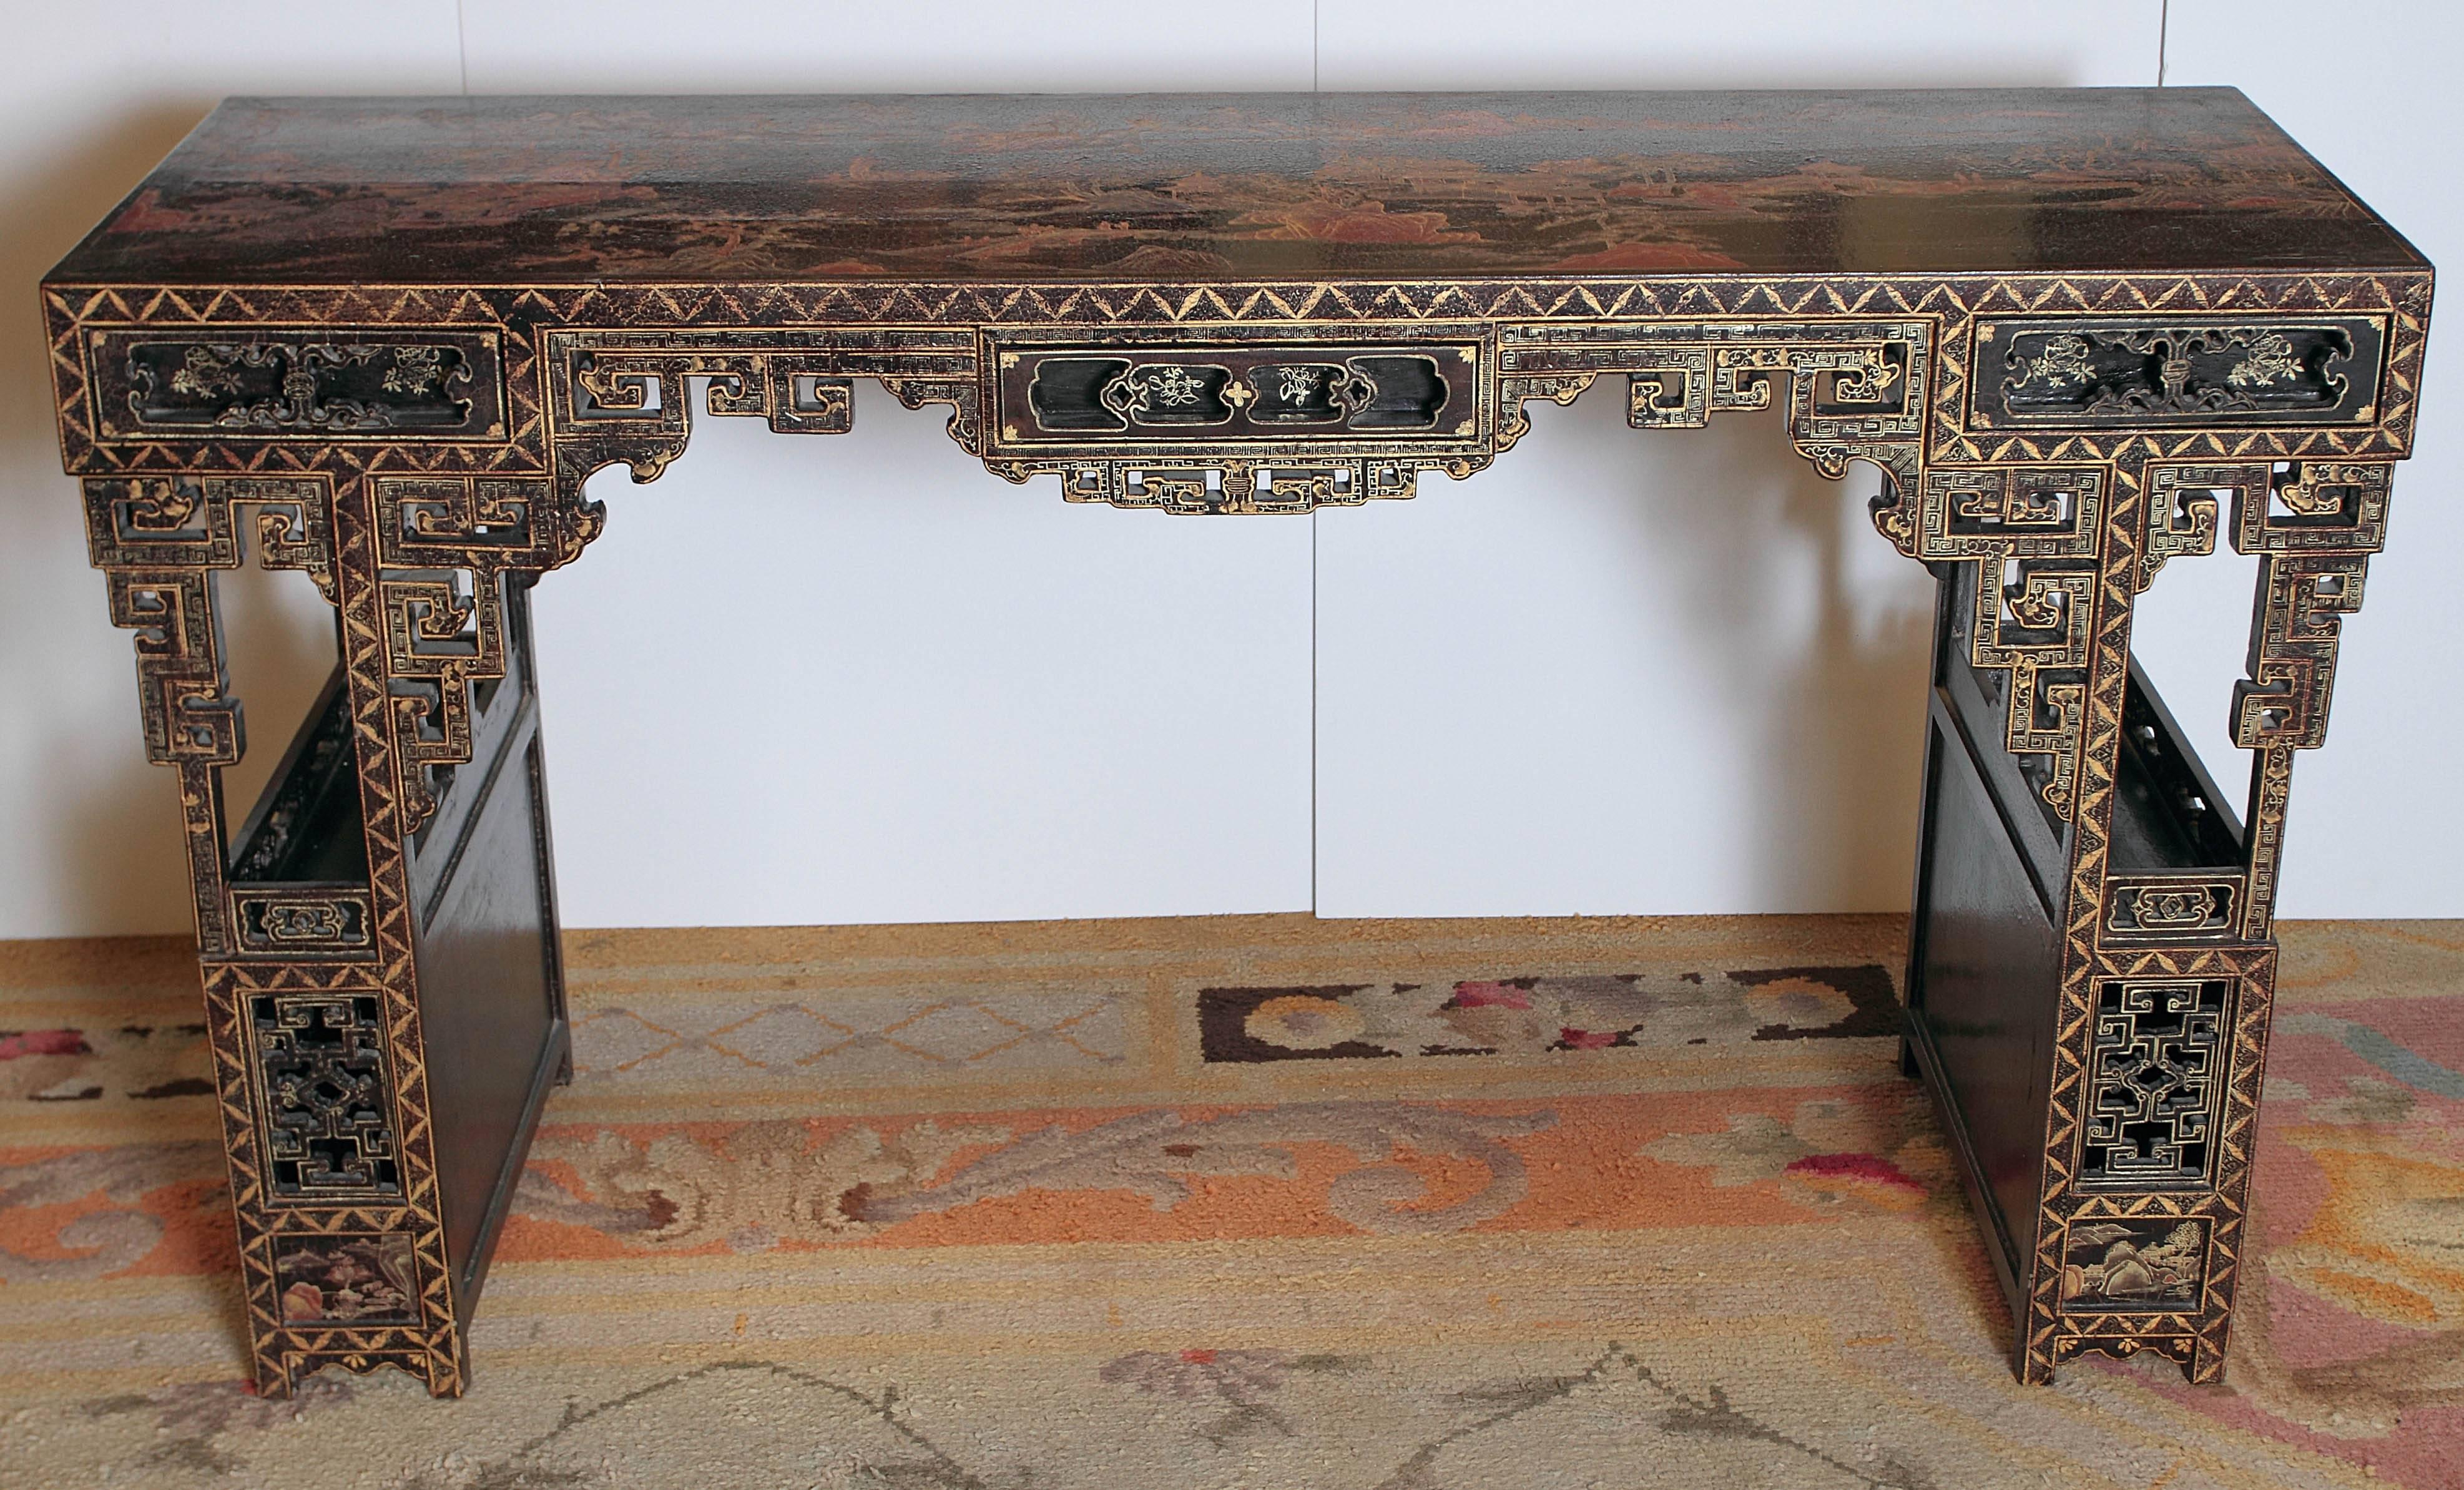 19th century Chinese lacquered console. Matched carving and drawers on both sides.